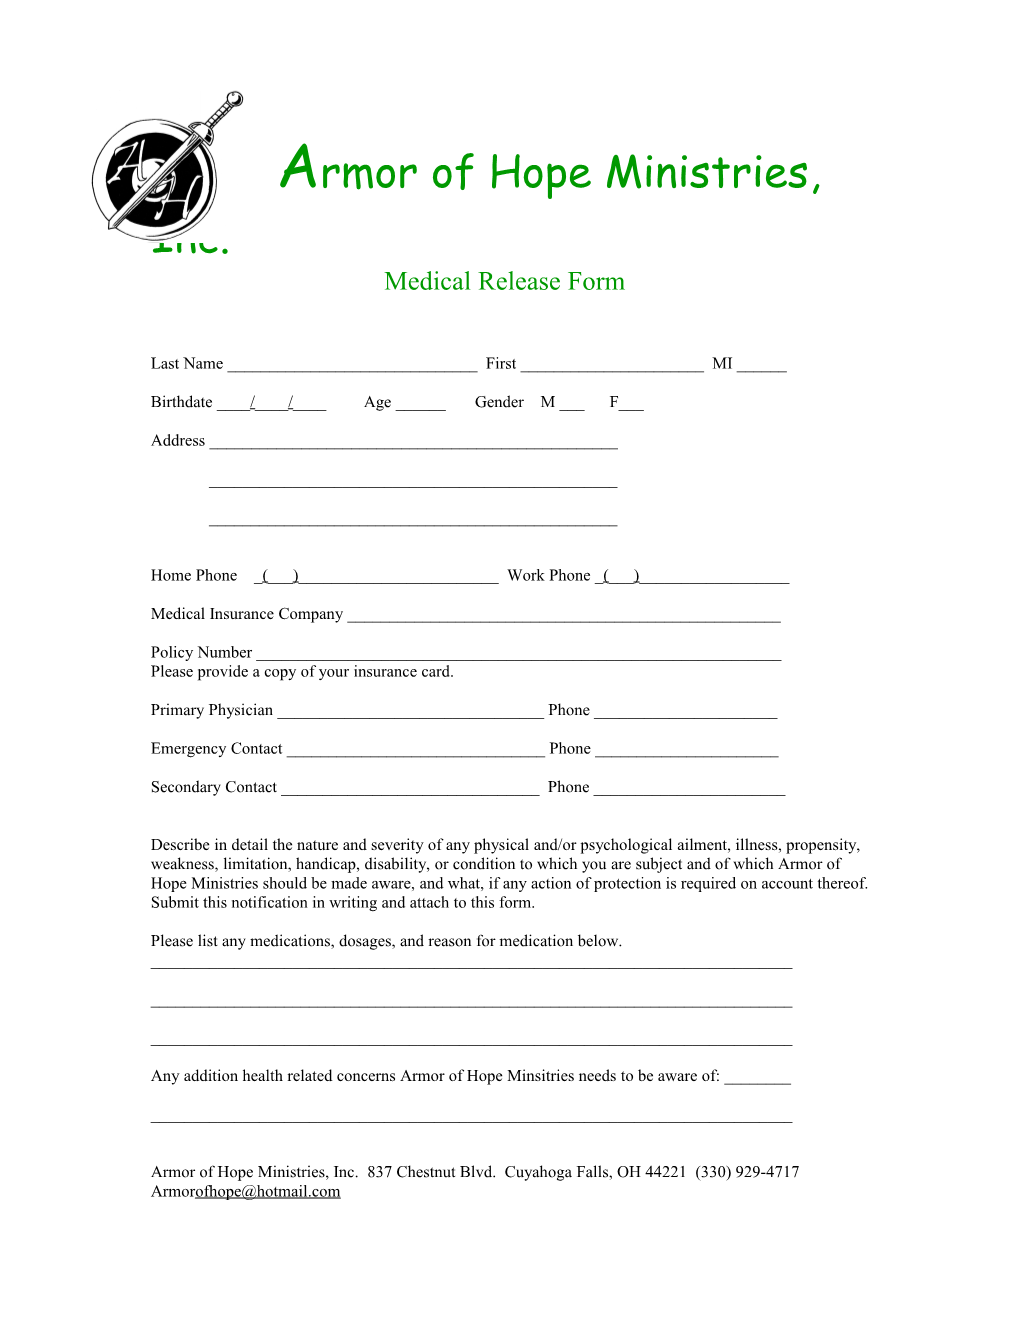 Armor of Hope Ministries, Inc